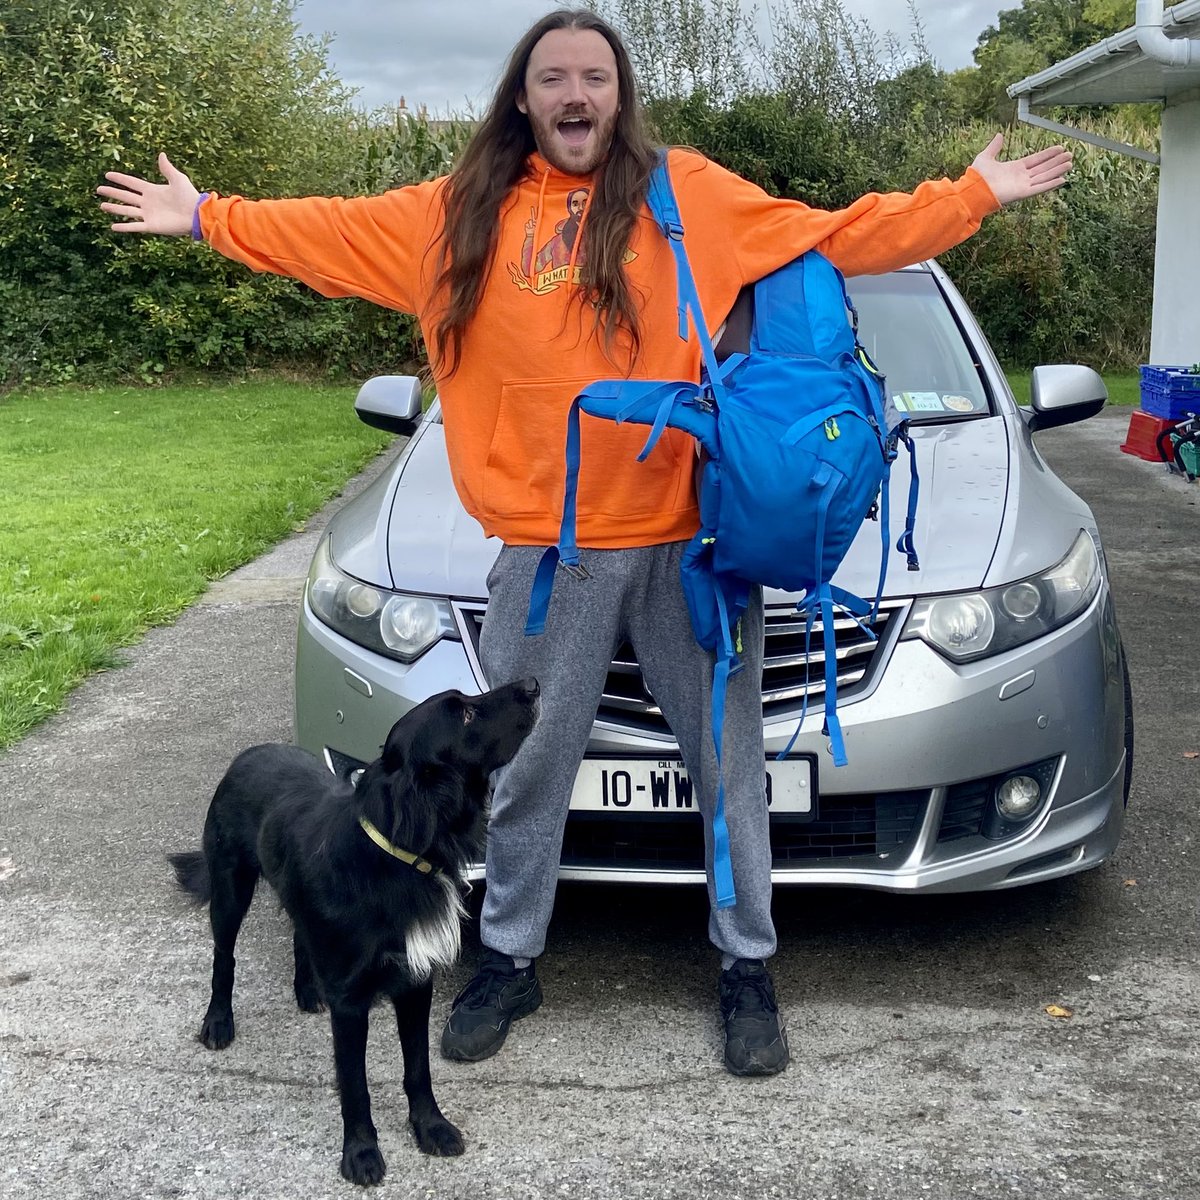 Today I am setting off on the biggest road trip of my life🌎I will be traveling to Scotland,travel down through all of the UK,France through Paris down to Portugal to the bottom of Spain and back again,it’s gonna be a long two weeks🙌follow my vlogs on my YouTube page🧡 #roadtrip